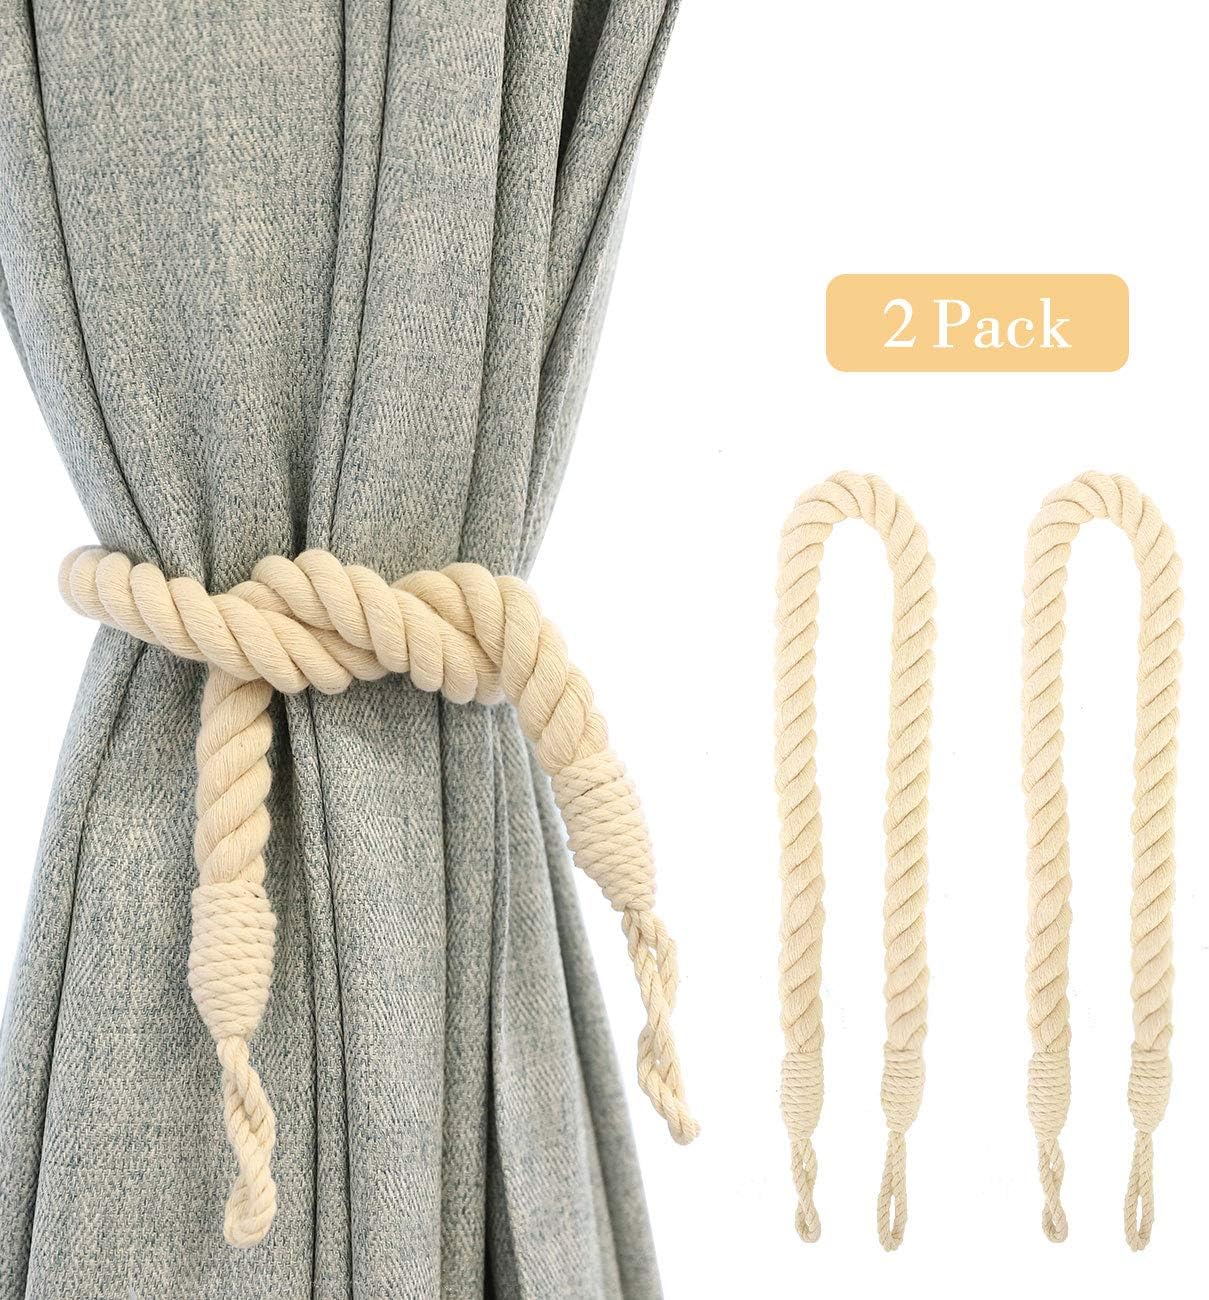 Blind Cord Tassels: Are Yours Safe for Kids